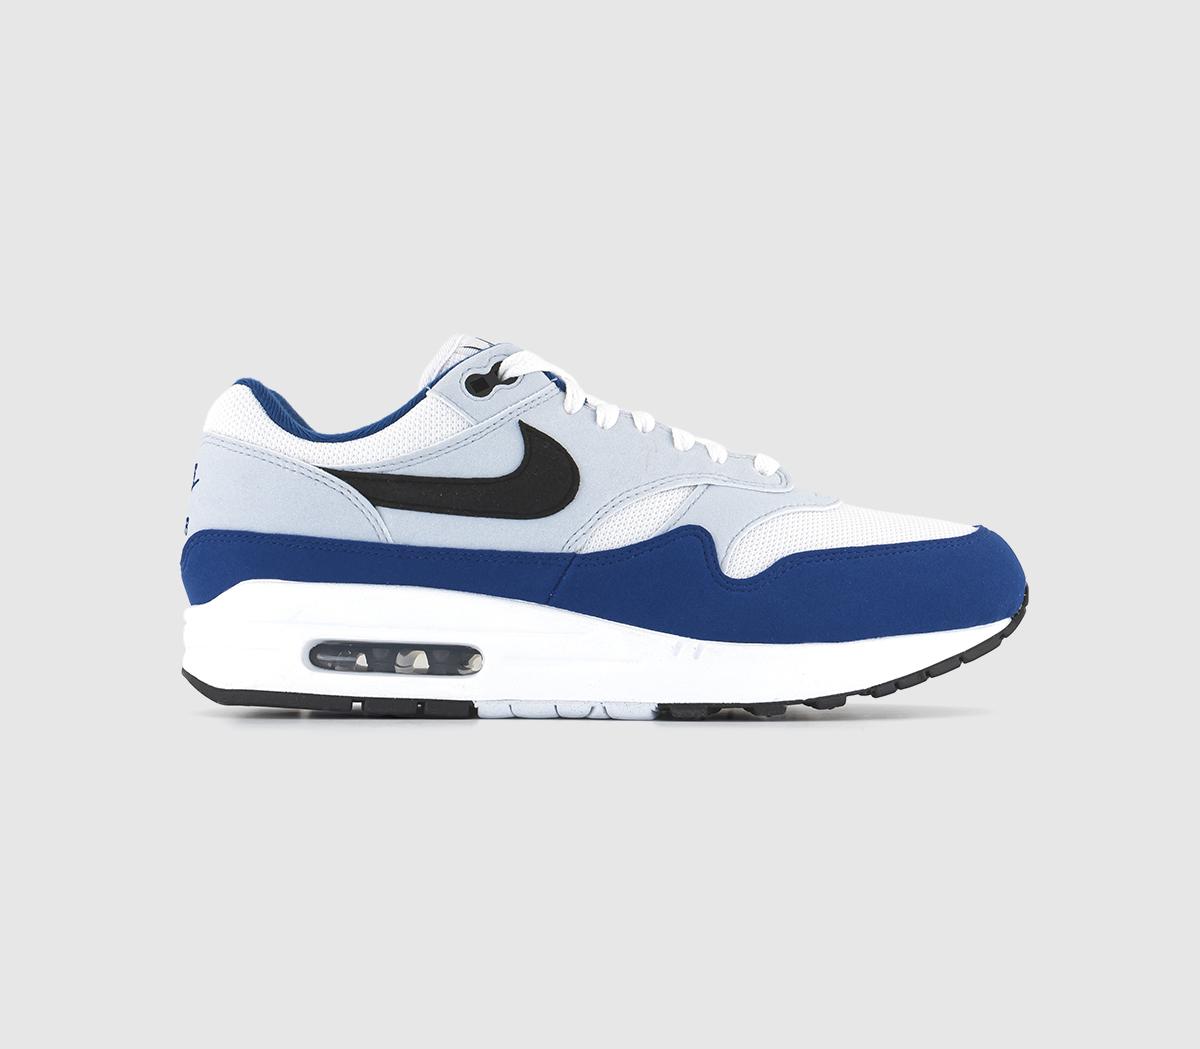 Nike Air Max 1 PRM Sneakers in Blue in Slate/Blue/Lemon Wash, Size UK 5.5 | End Clothing